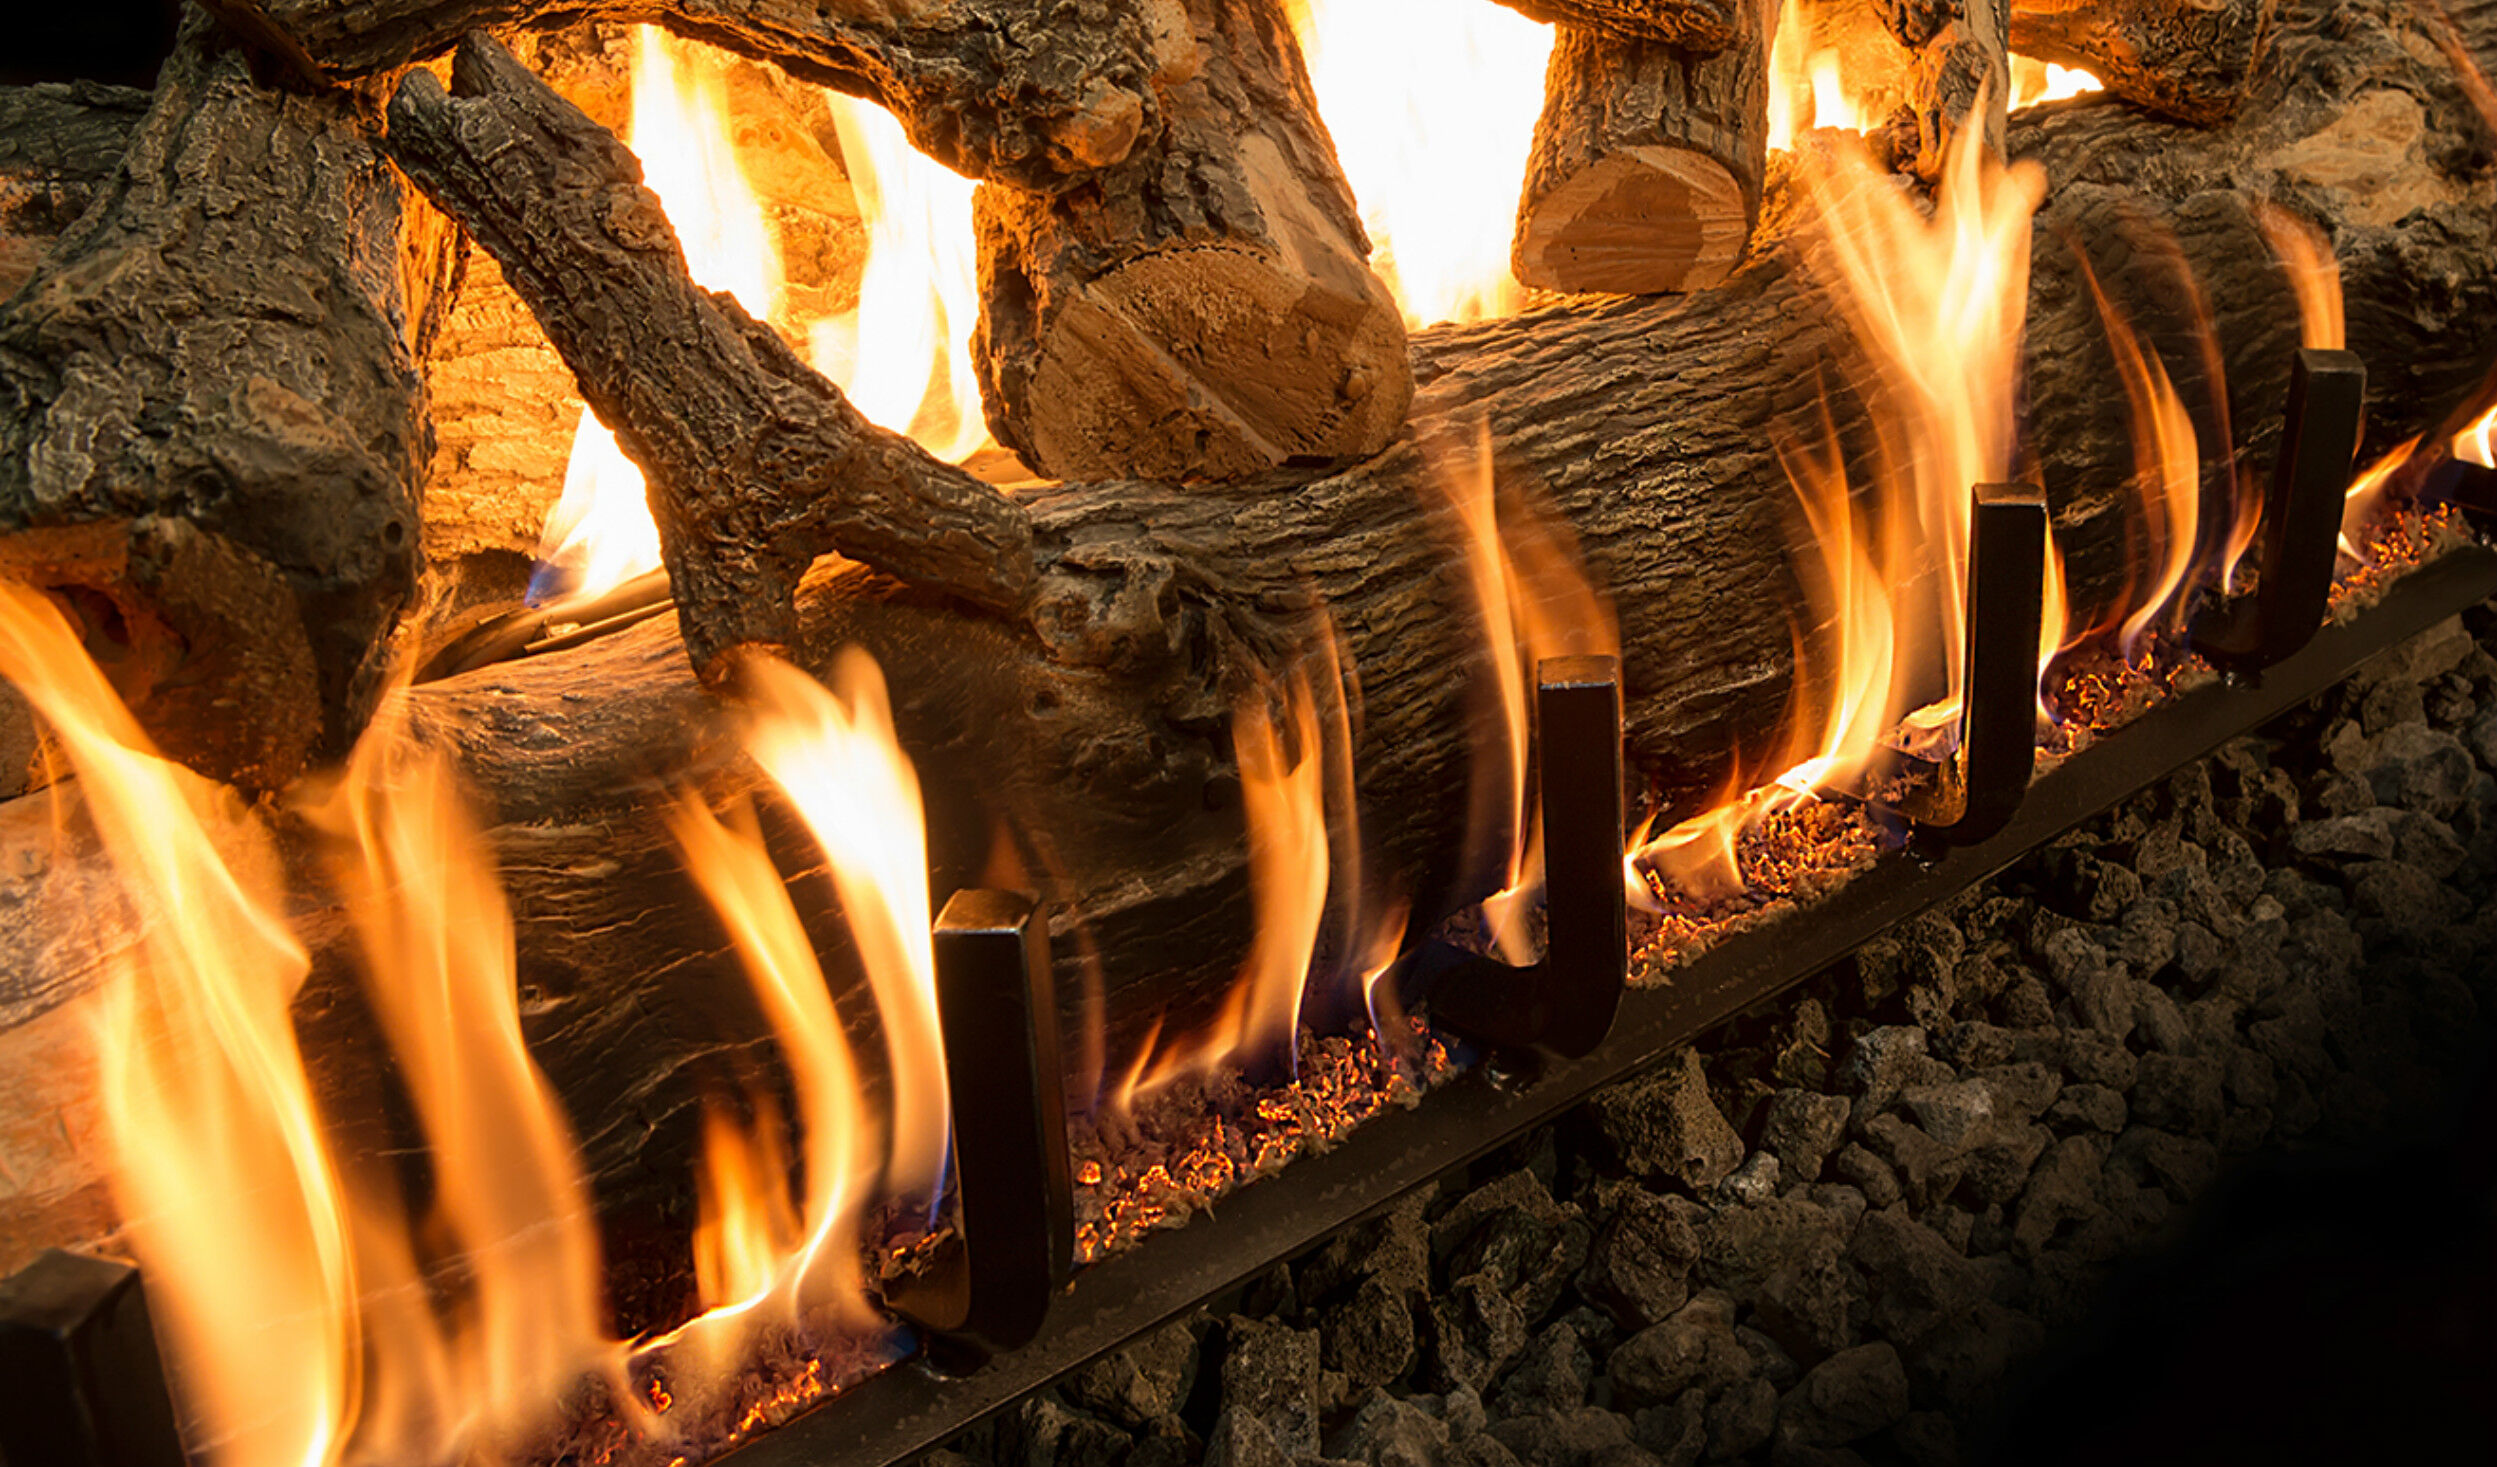 A close-up view of a rustic gas log set with hand-painted bark details and orange flames.